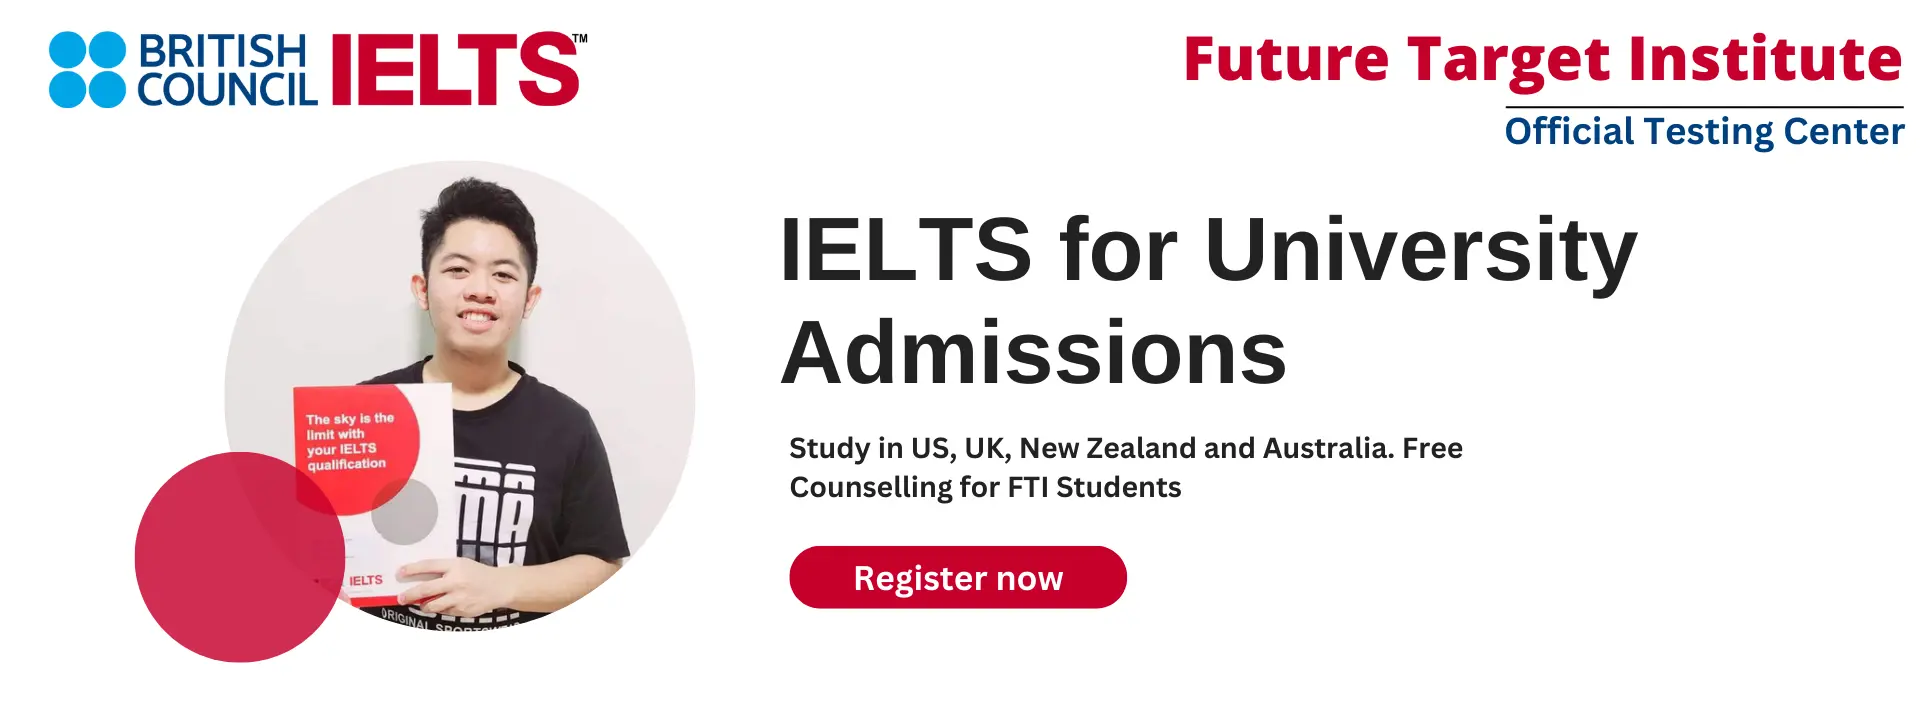 Ace your IELTS exam in Dubai with expert guidance from Future Target Institute